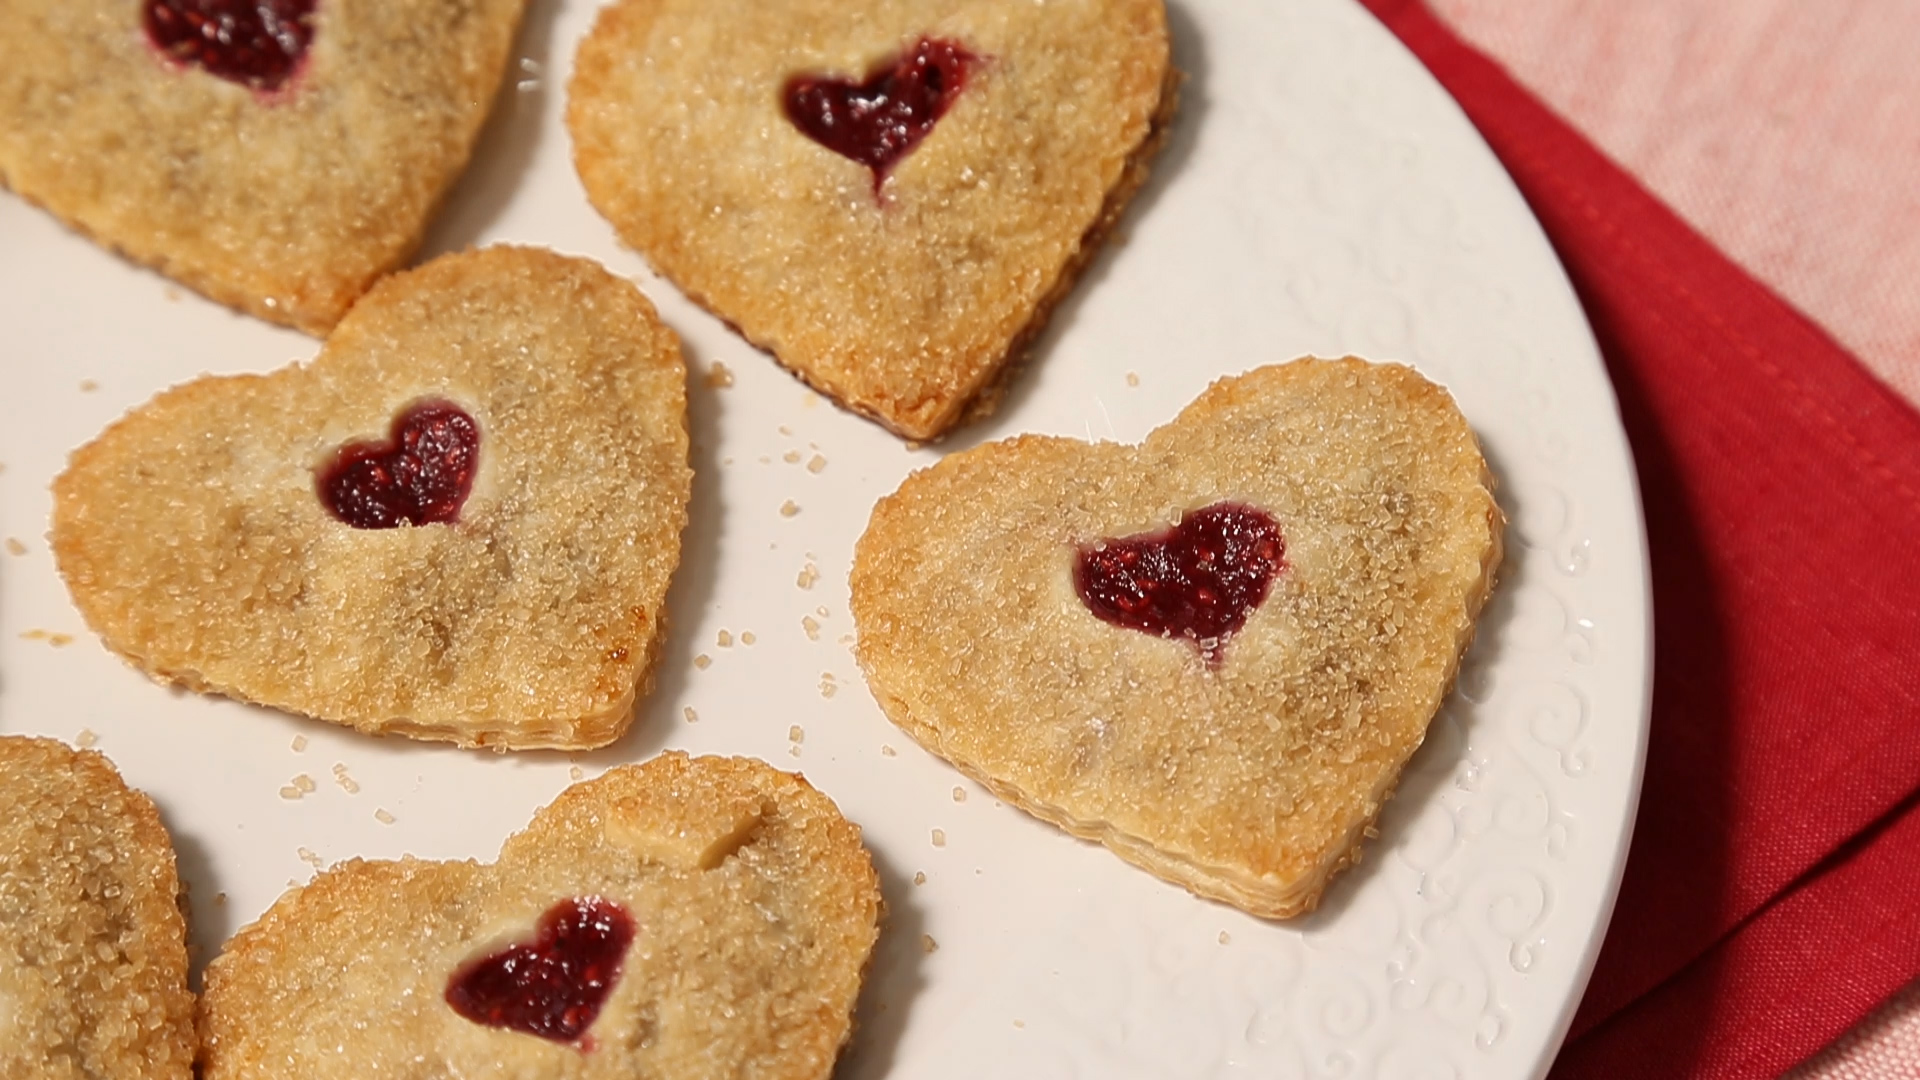 How to Make Heart-Shaped Hand Pies